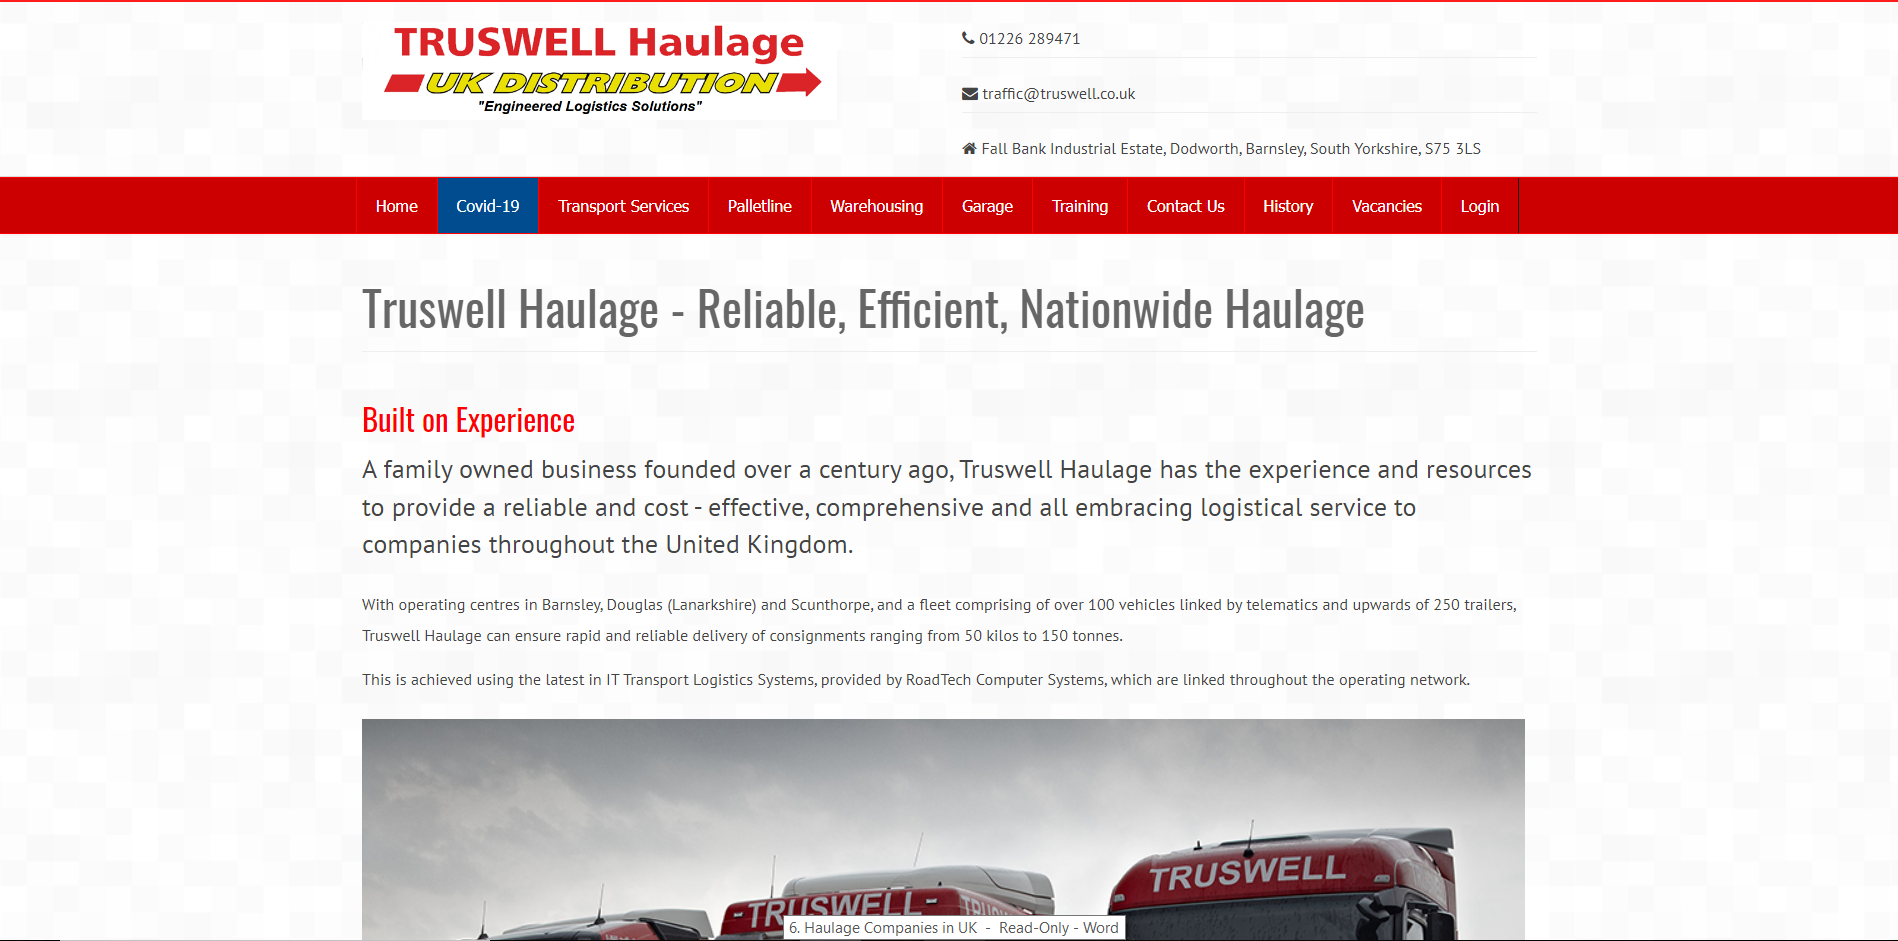 Truswell Haulage